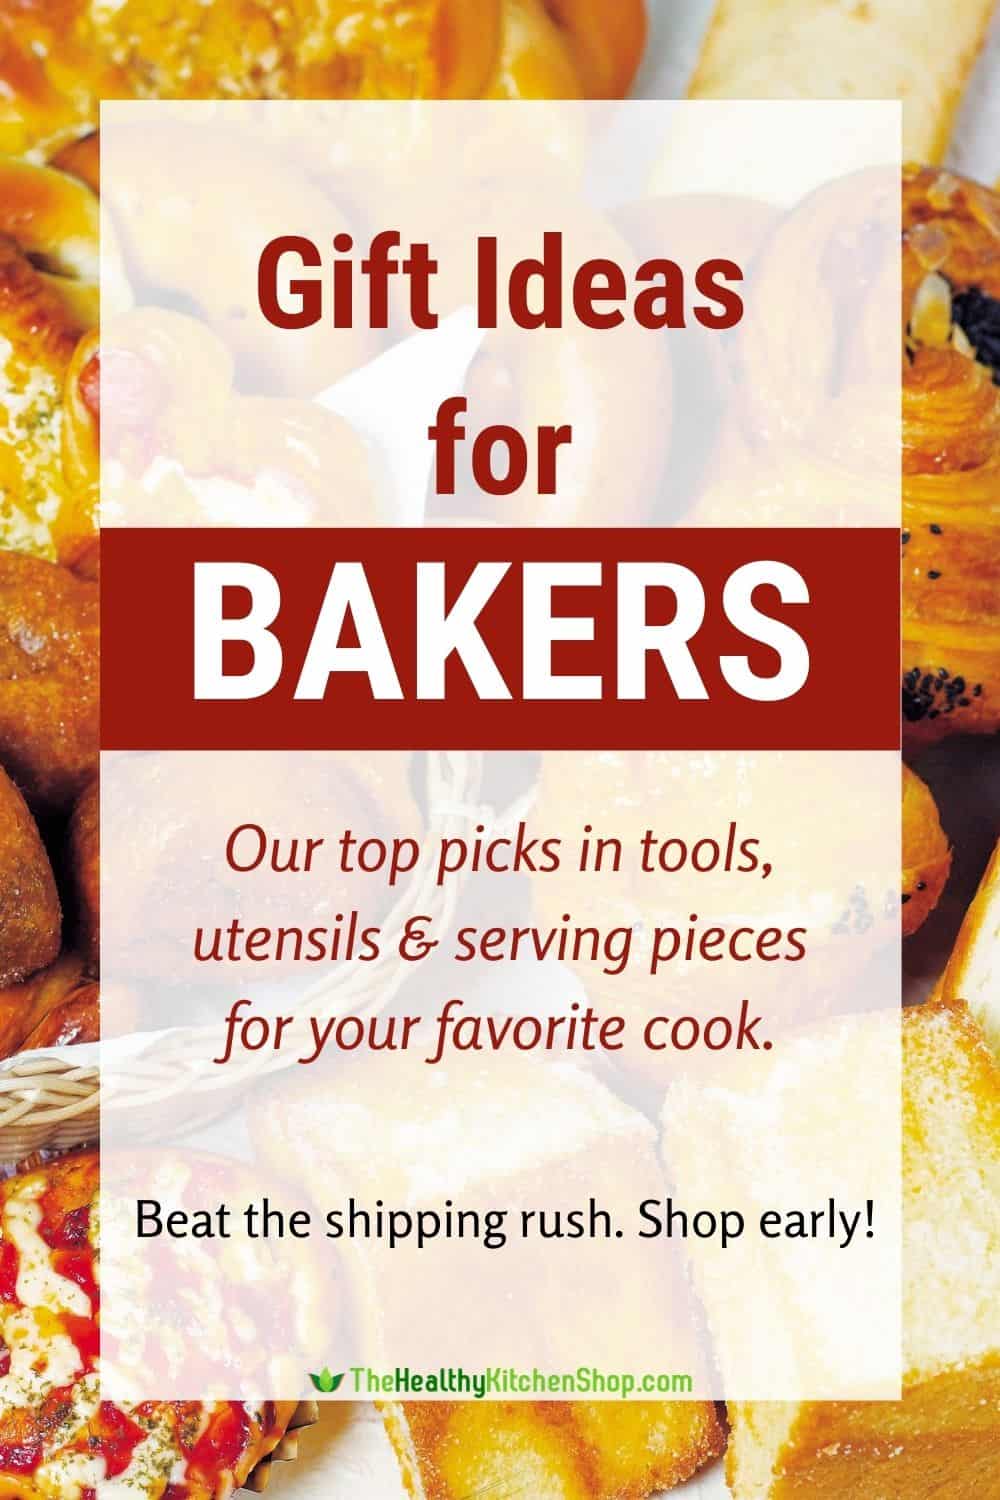 Gift Ideas for Bakers